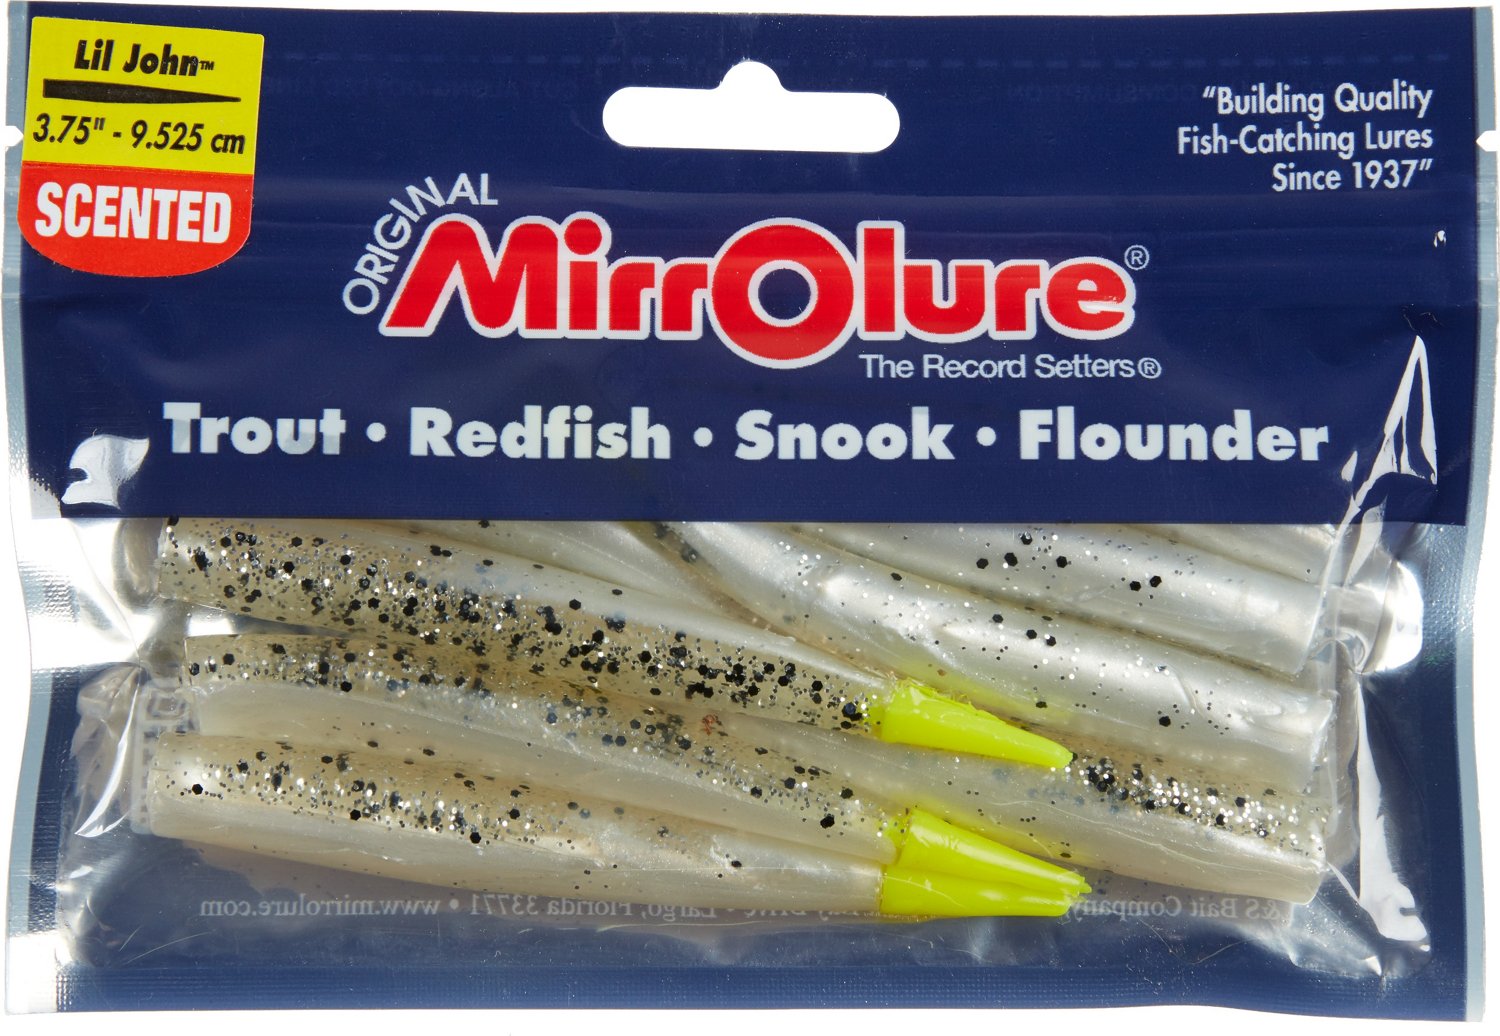 MirrOlure® Lil John™ Scented 3-3/4 Soft Baits 8-Pack